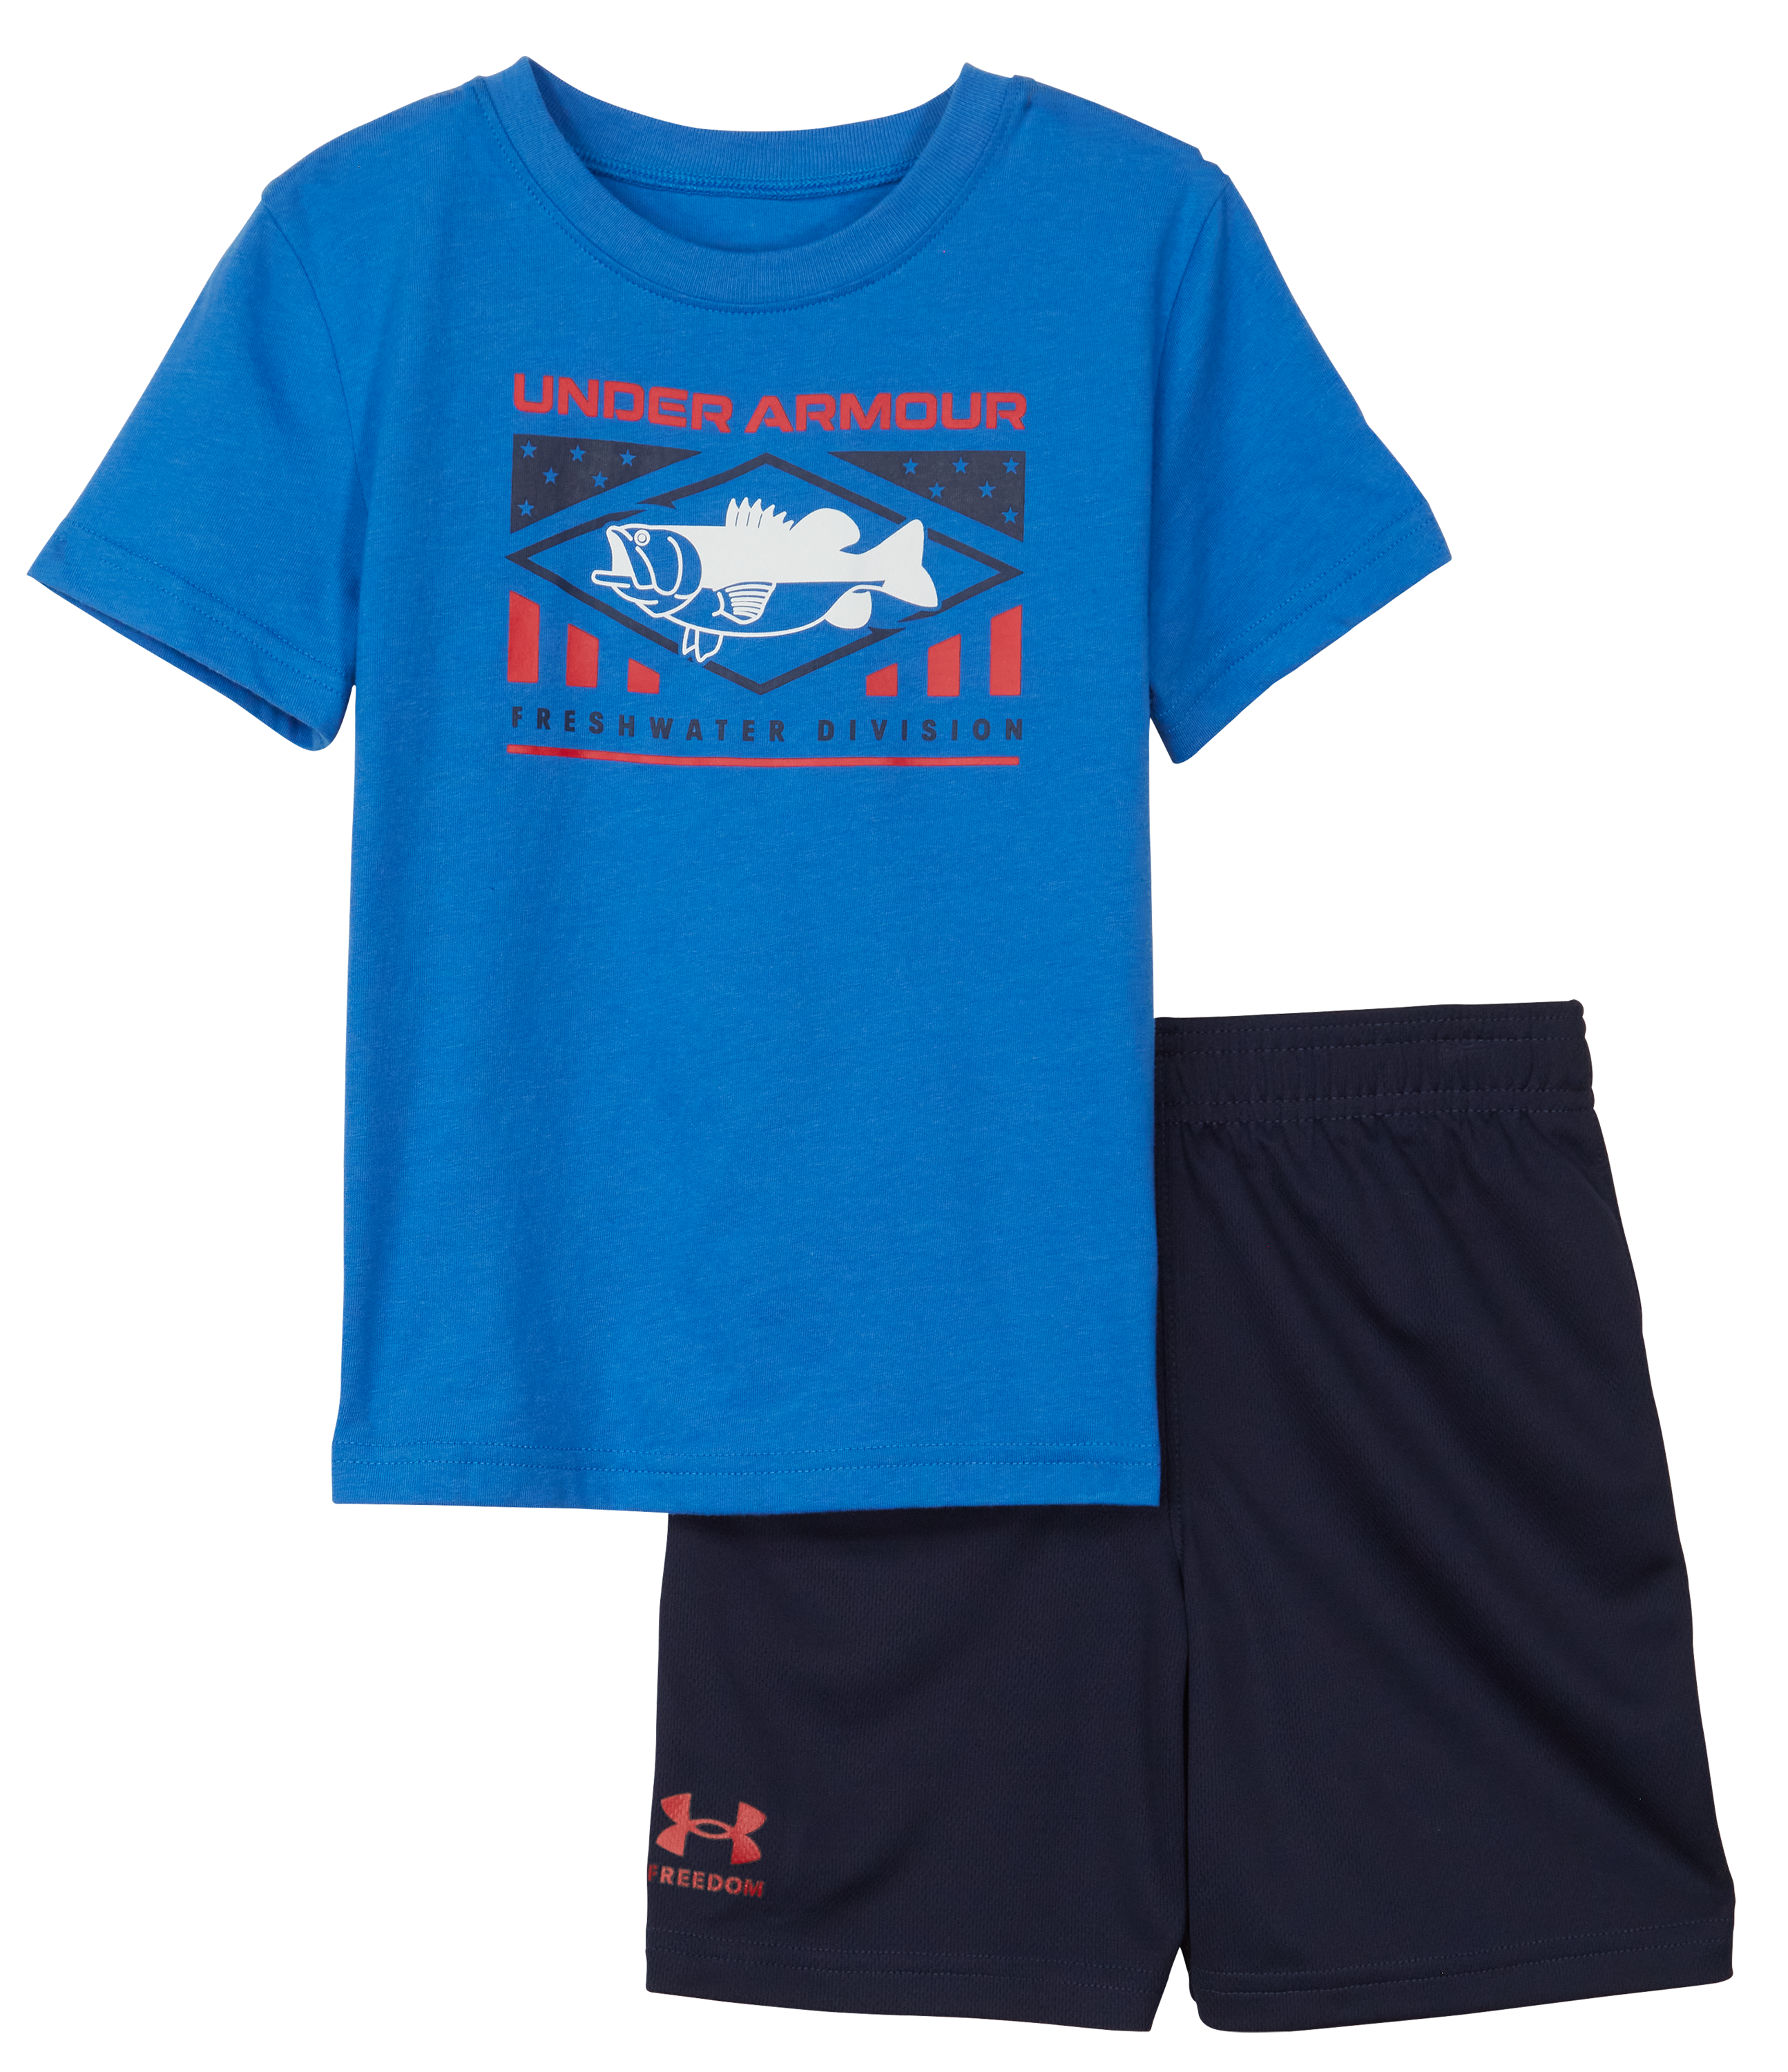 Under Armour Freedom Bass Short-Sleeve T-Shirt and Shorts Set for